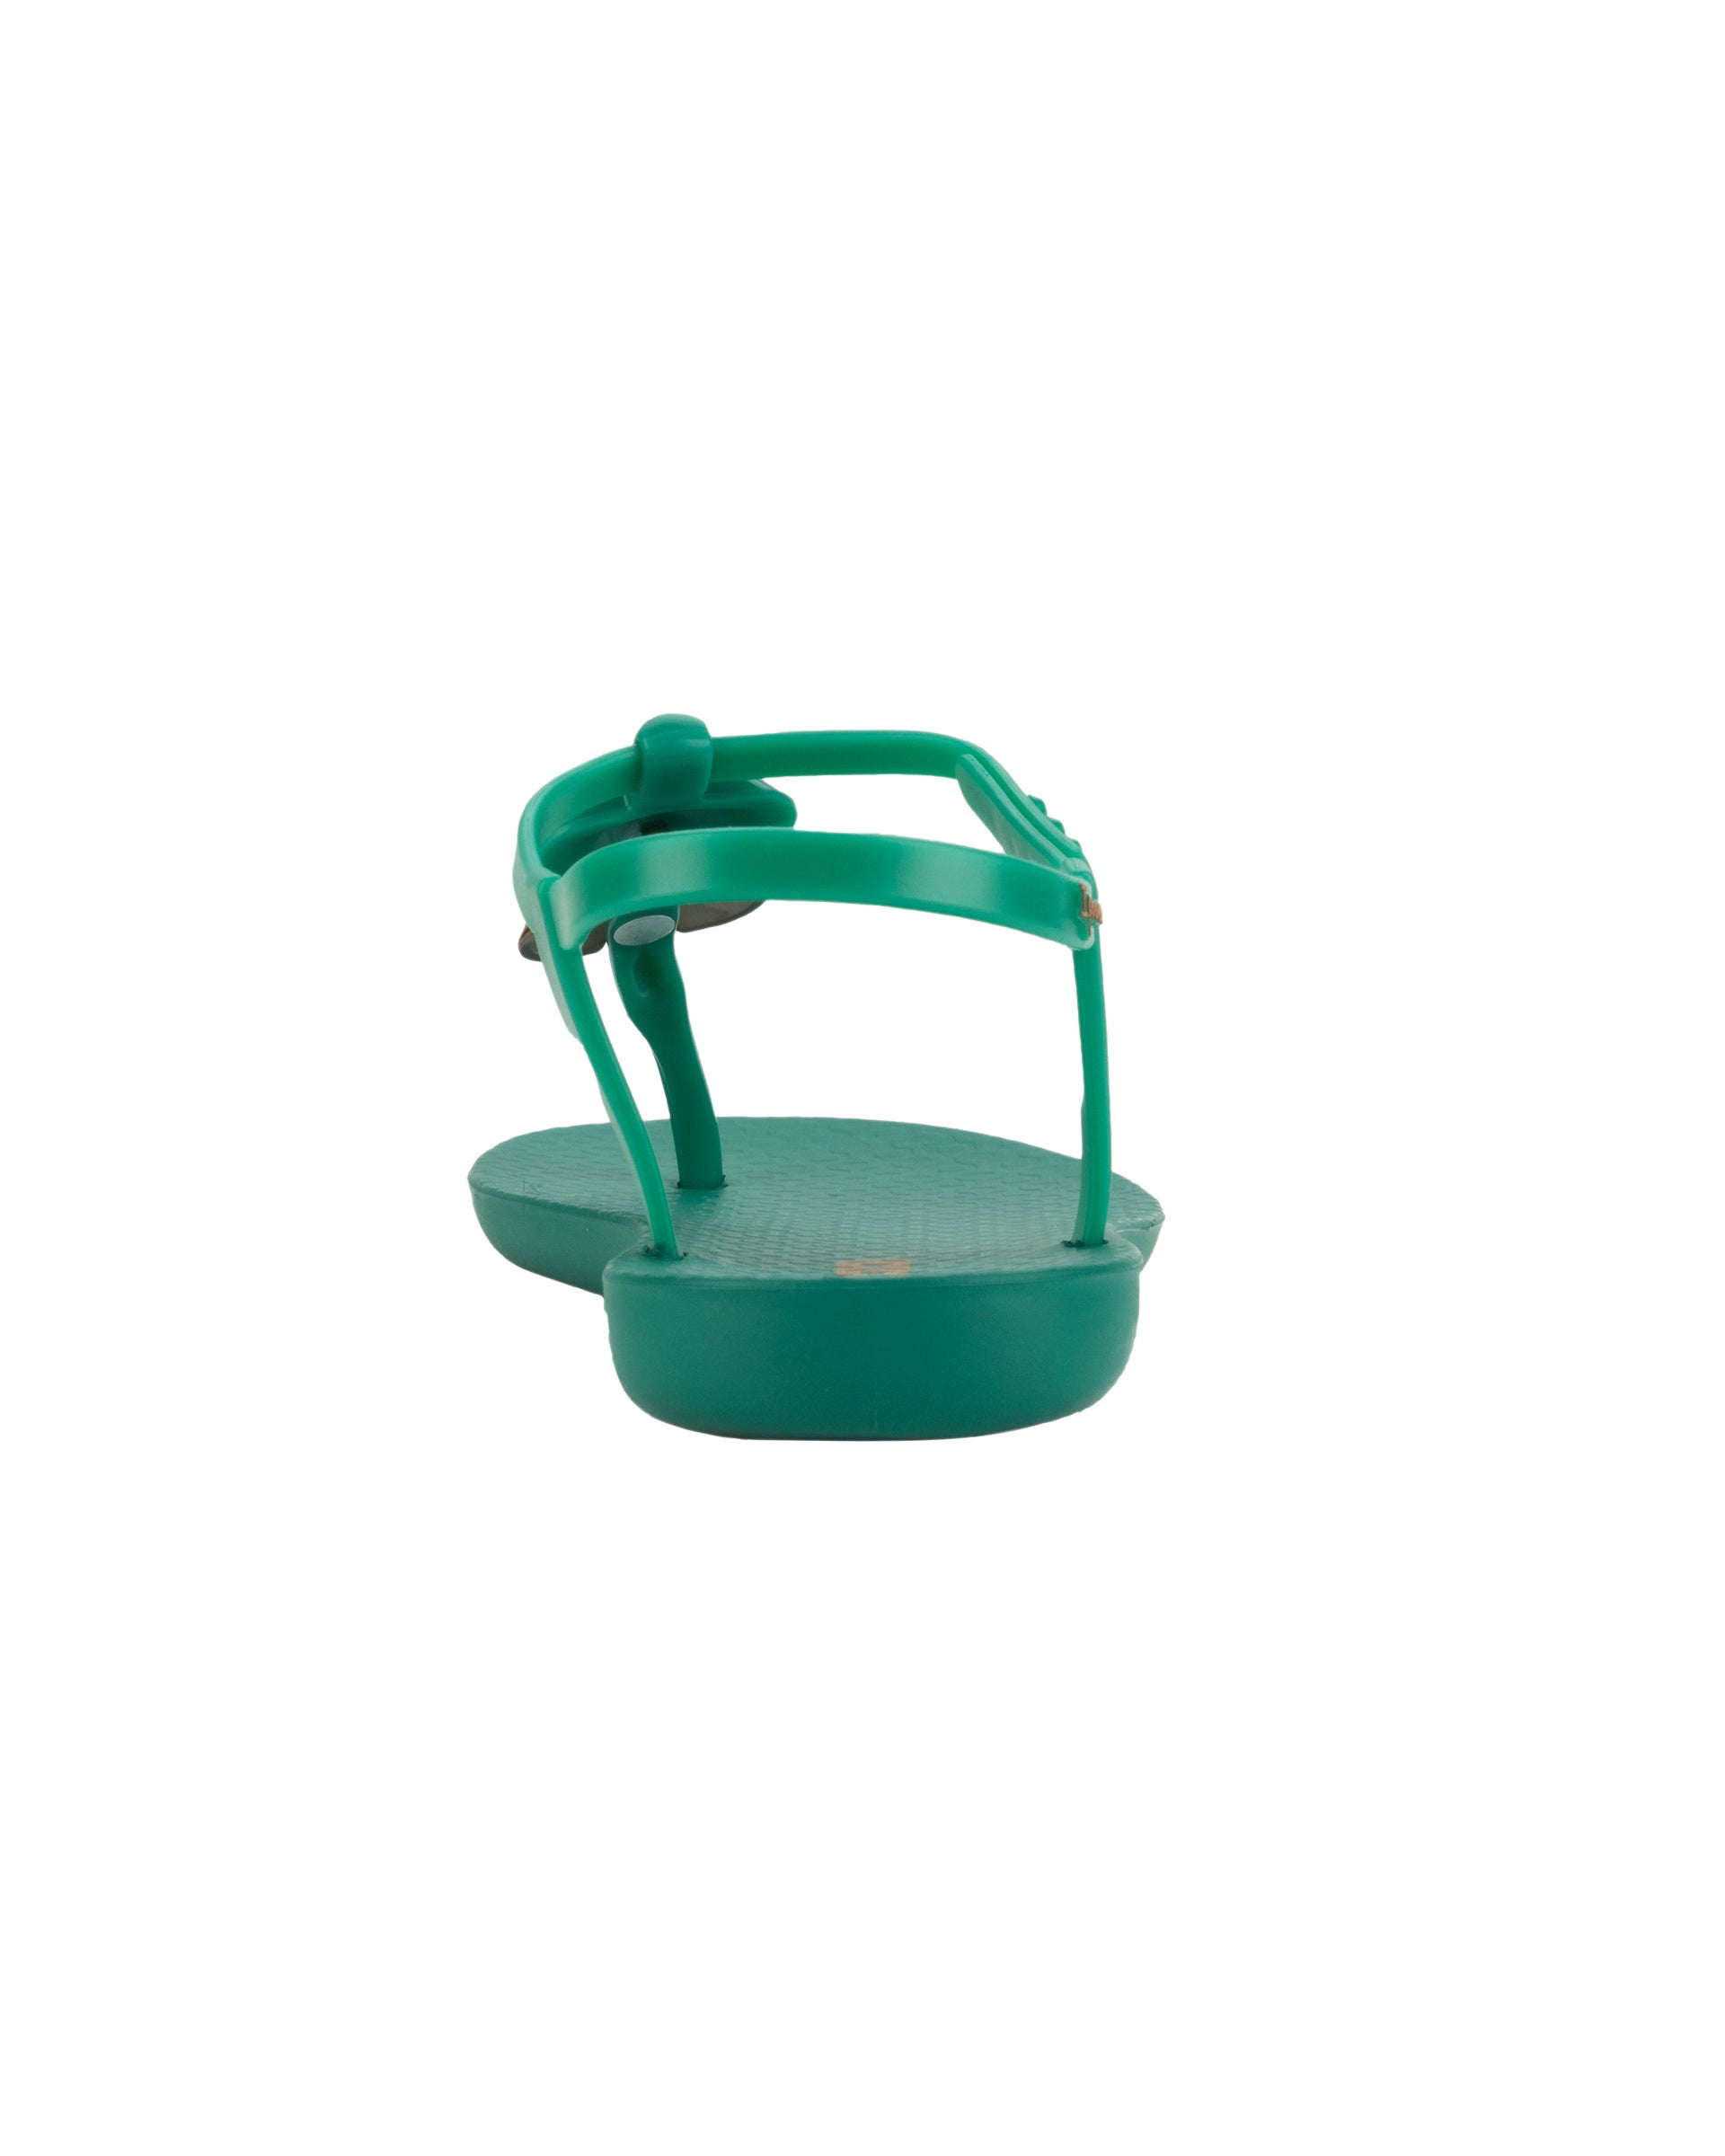 Back view of a green Ipanema Class women's sandal with 3 bubble baubles on the t-strap.